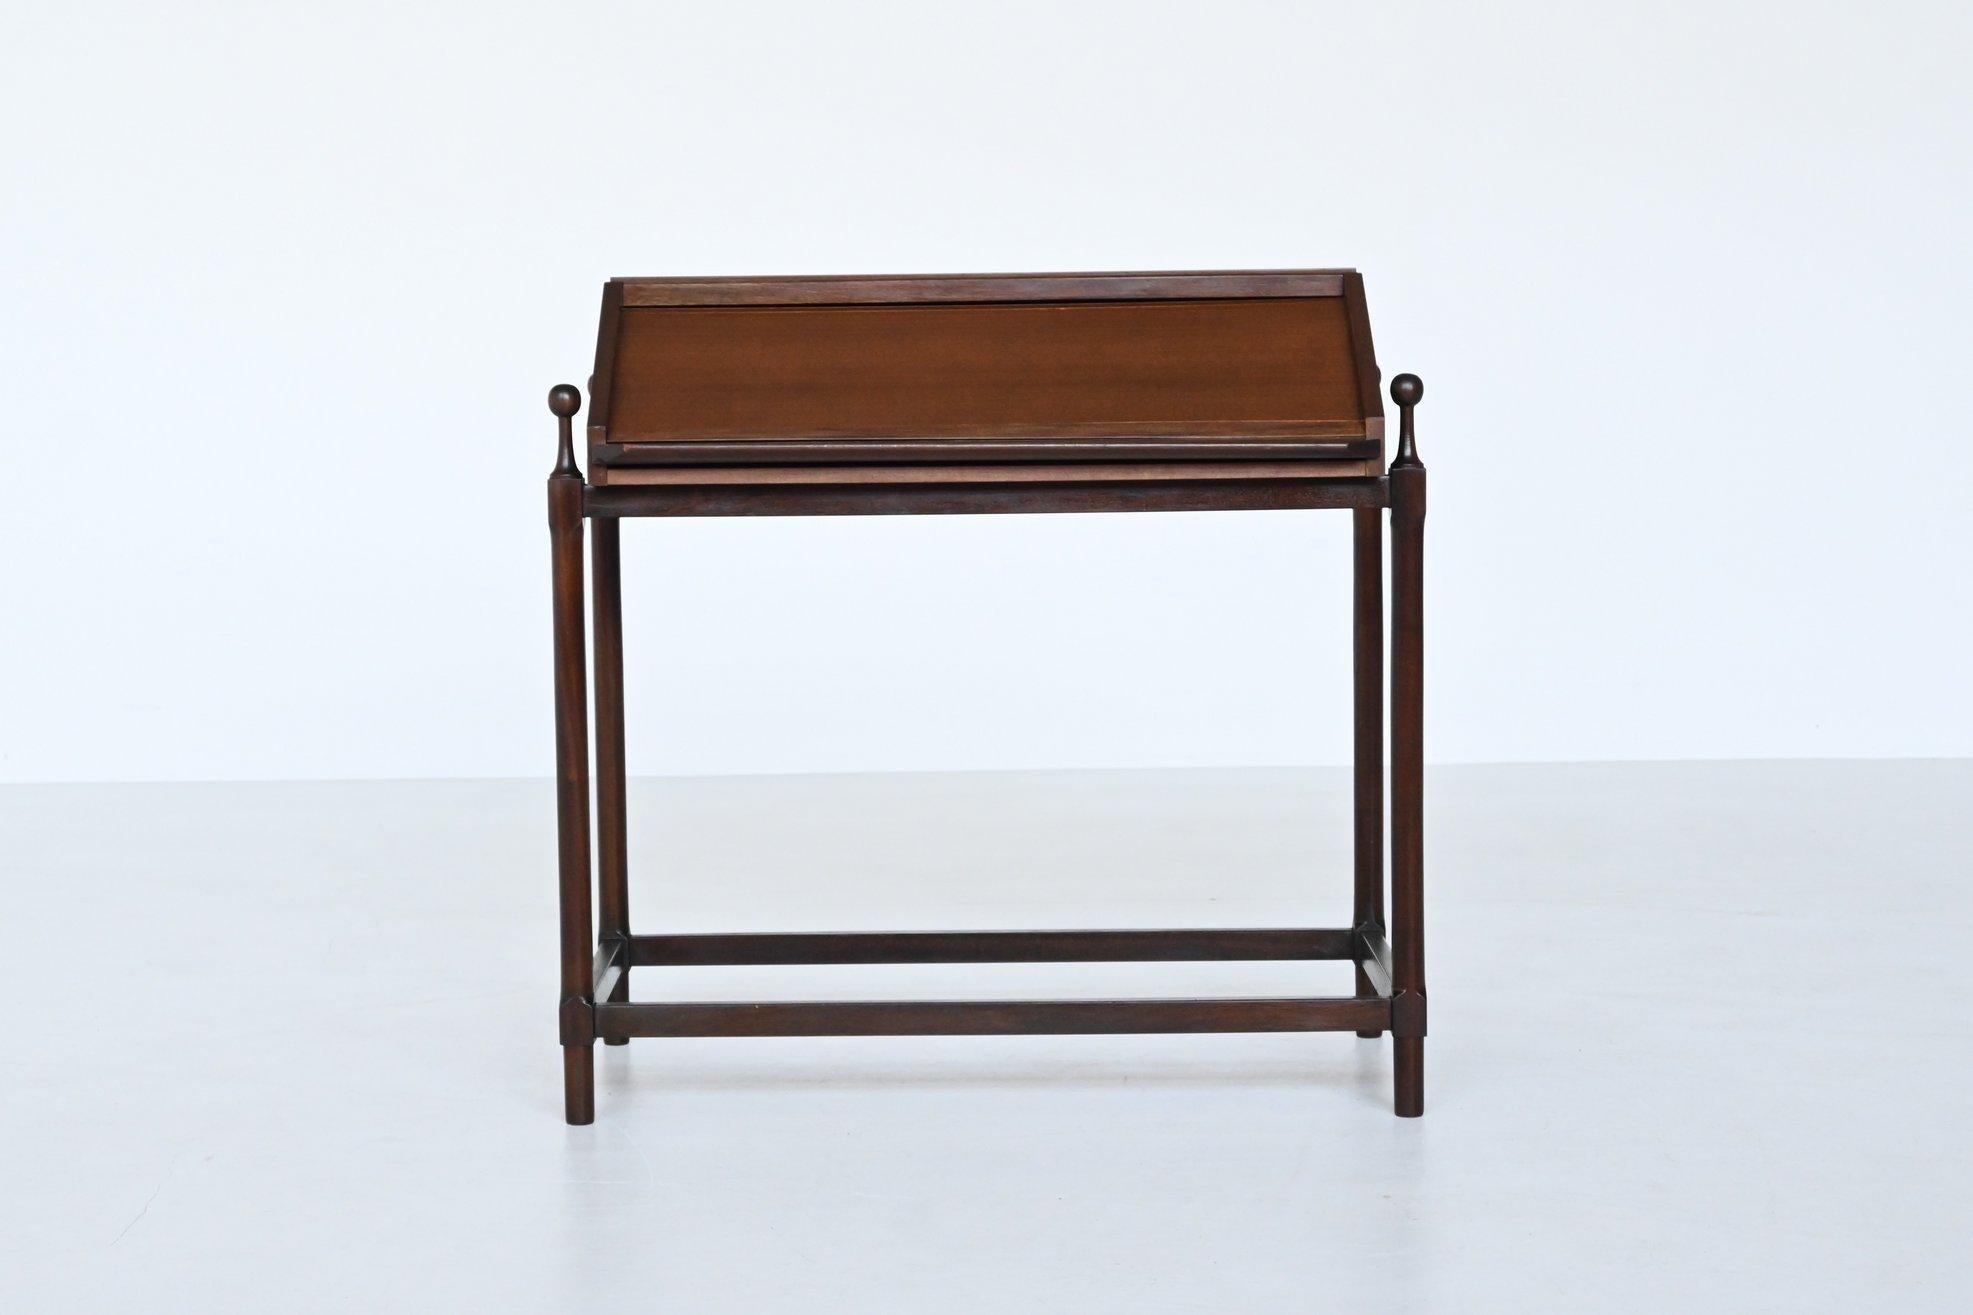 Beautiful and compact rollup writing desk designed and manufactured by Fratelli Proserpio, Italy 1960. This elegant desk is executed in rich natural teak wood. The top has a very nice trapezoidal shape and it has an unique mechanism that opens as